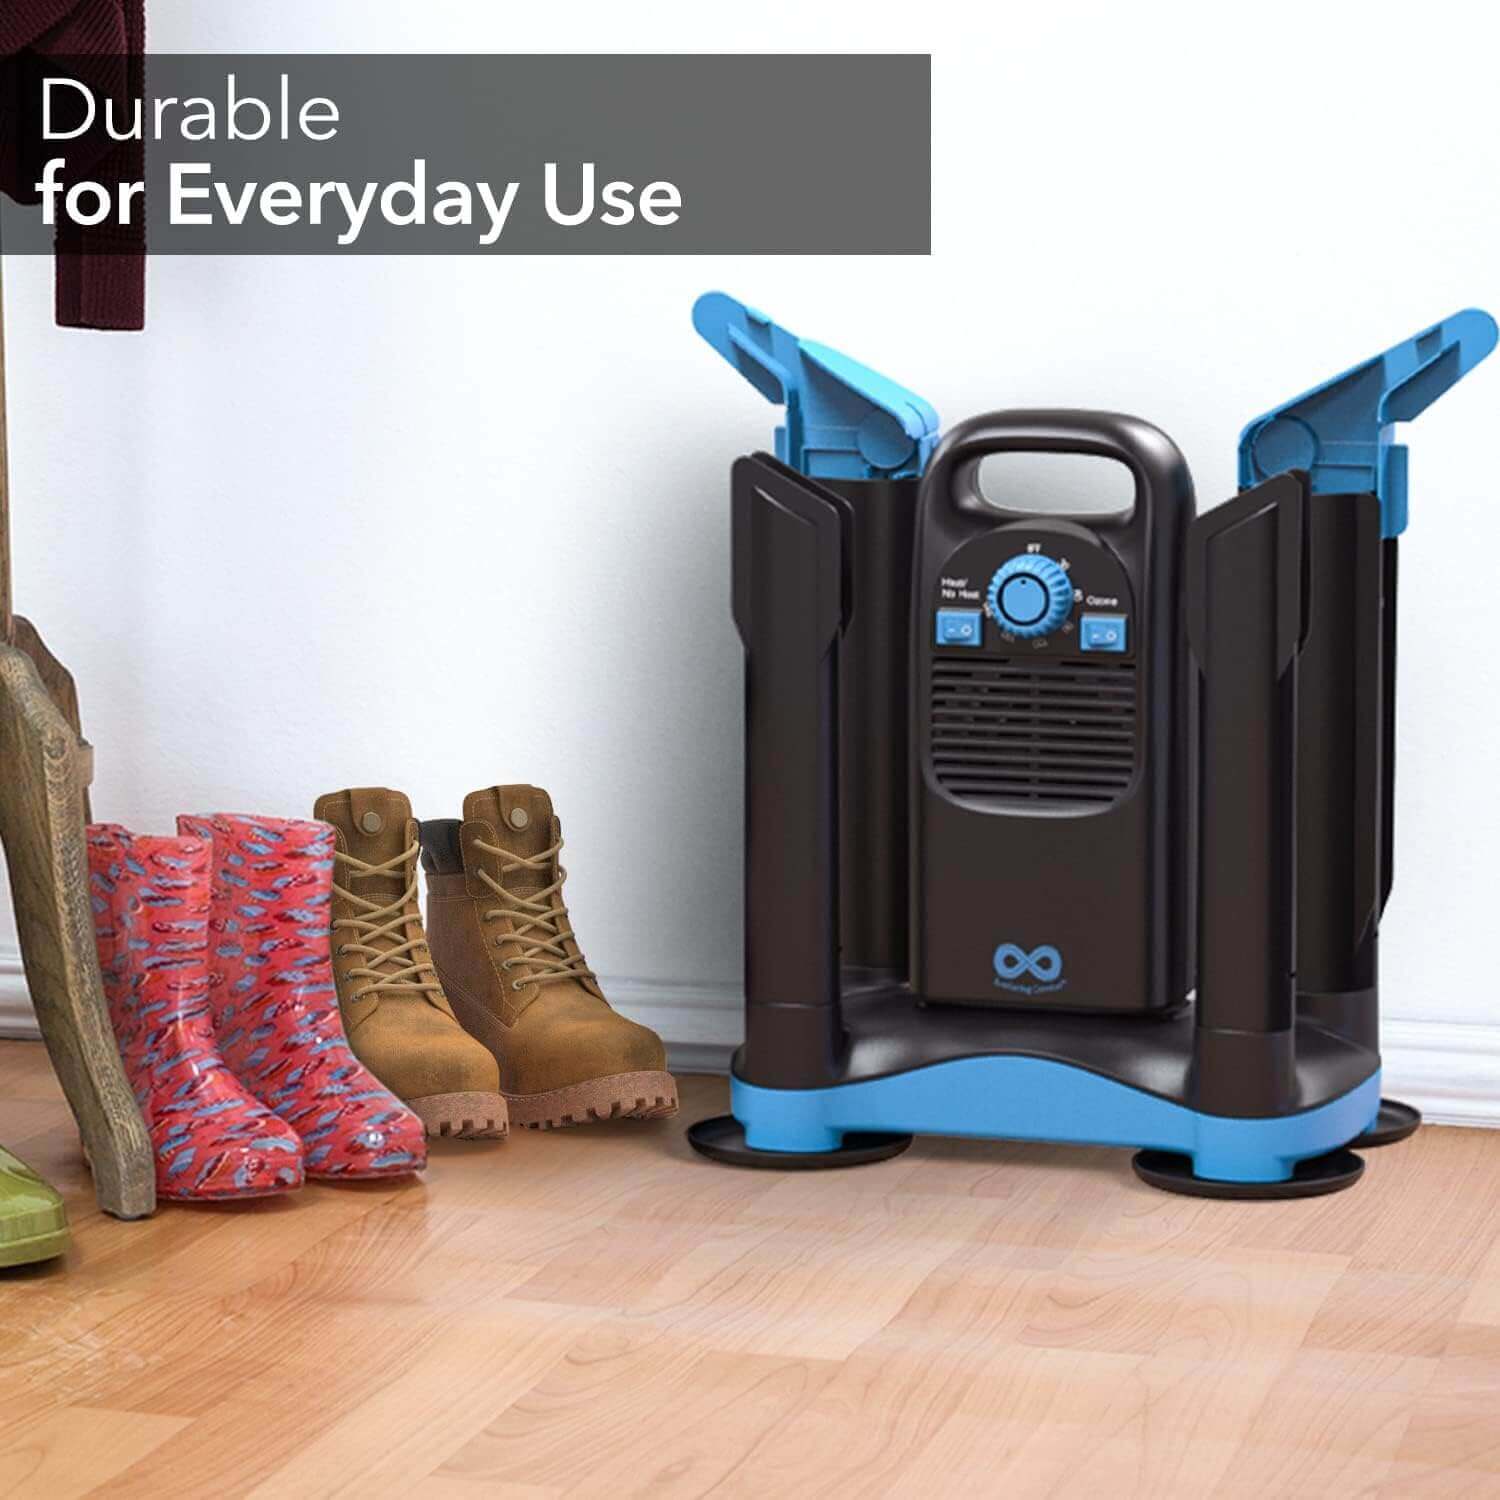 Shop The Latest >Everlasting Comfort ® Heavy Duty Boot Dryer and Deodorizer > *Only $108.74*> From The Top Brand > *Everlasting Comfortl* > Shop Now and Get Free Shipping On Orders Over $45.00 >*Shop Earth Foot*